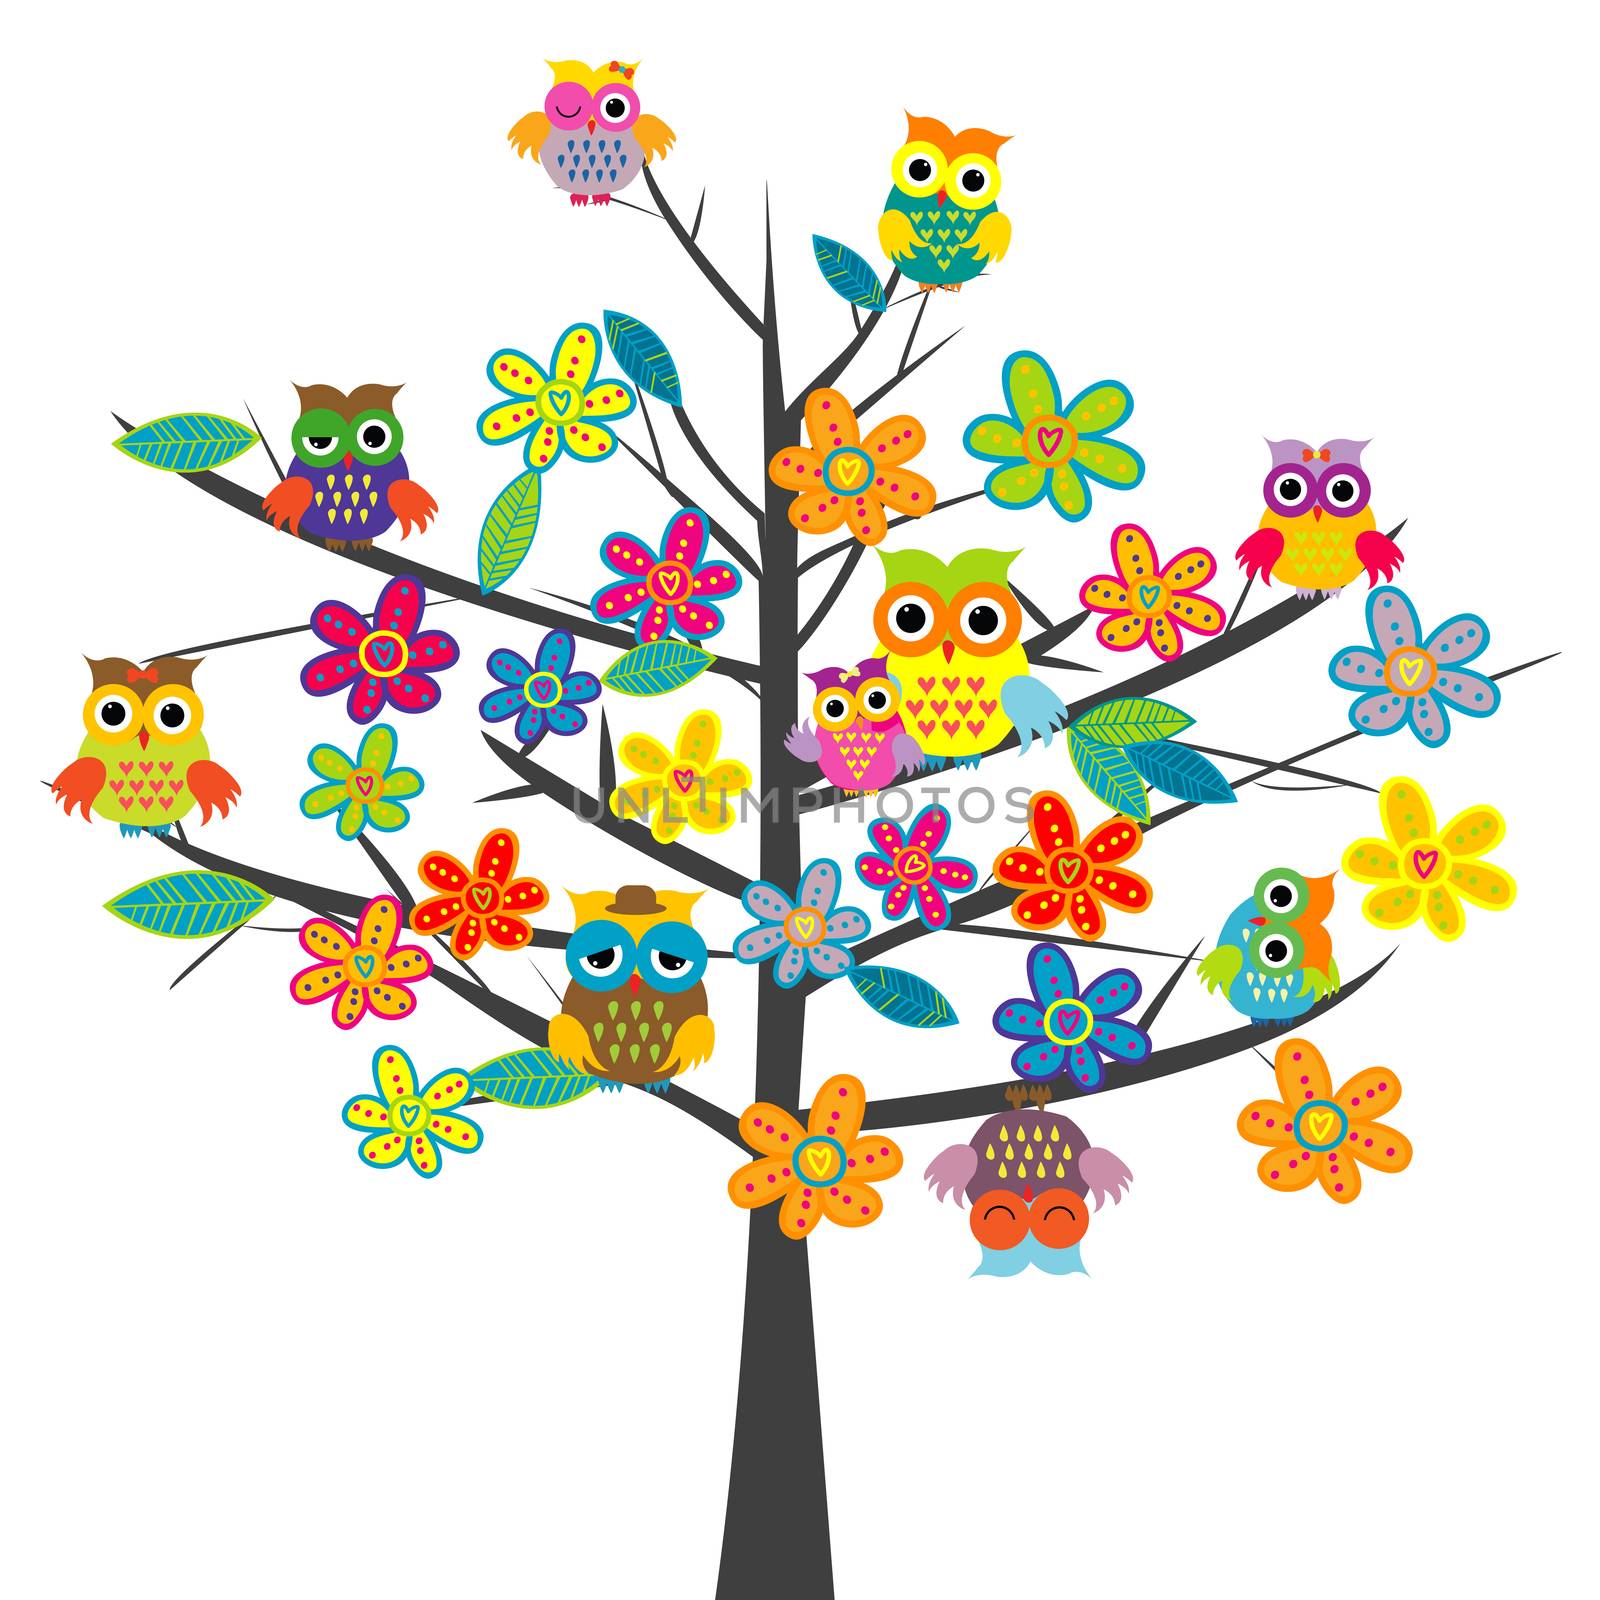 Colorful tree with flowers and cartoon owls by hibrida13